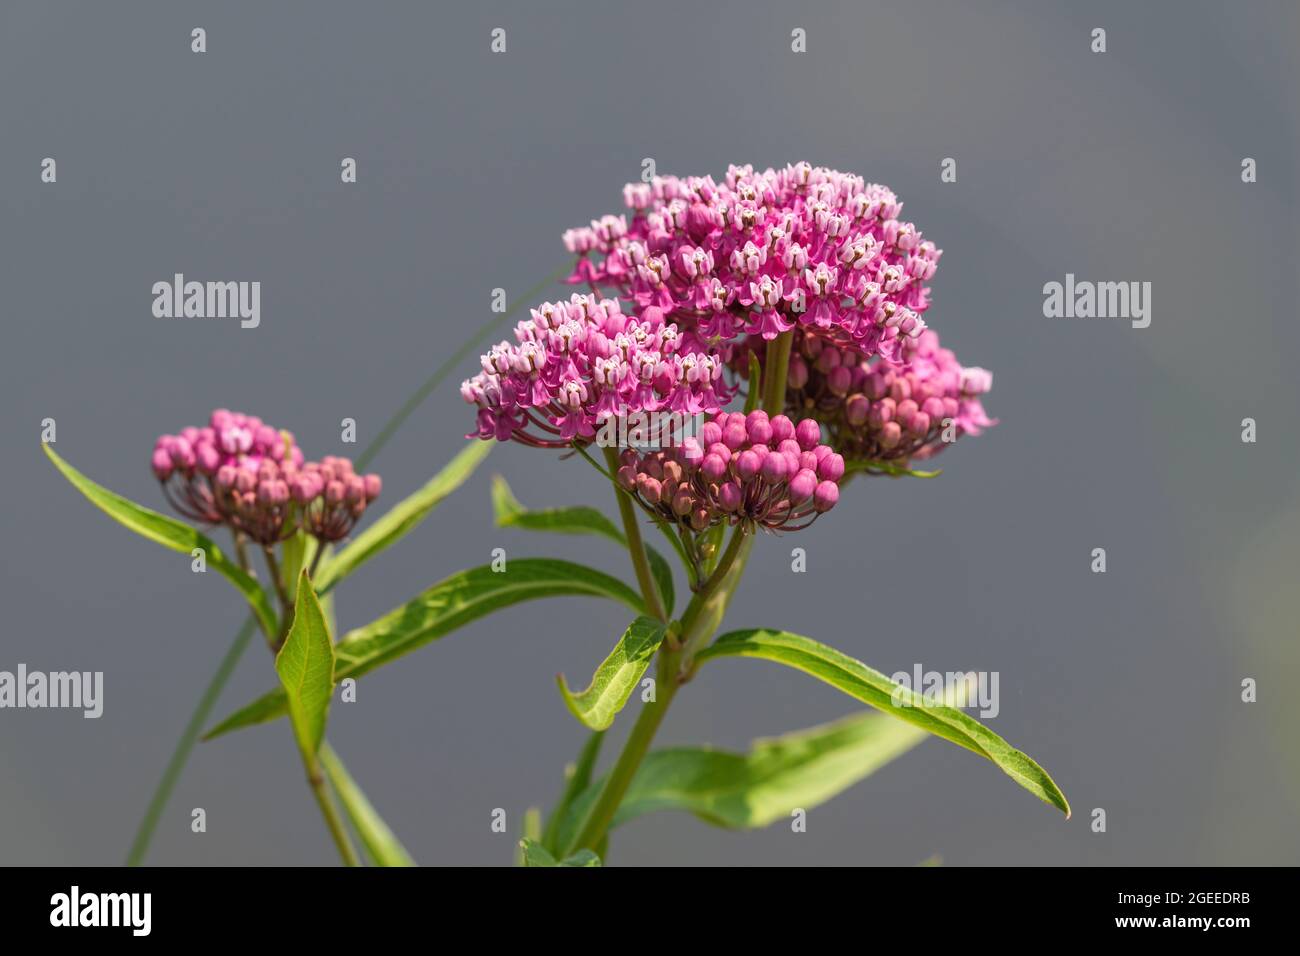 Closeup of a vibrantly pink Swamp Milkweed plant blossoming against a neutral gray background. Stock Photo